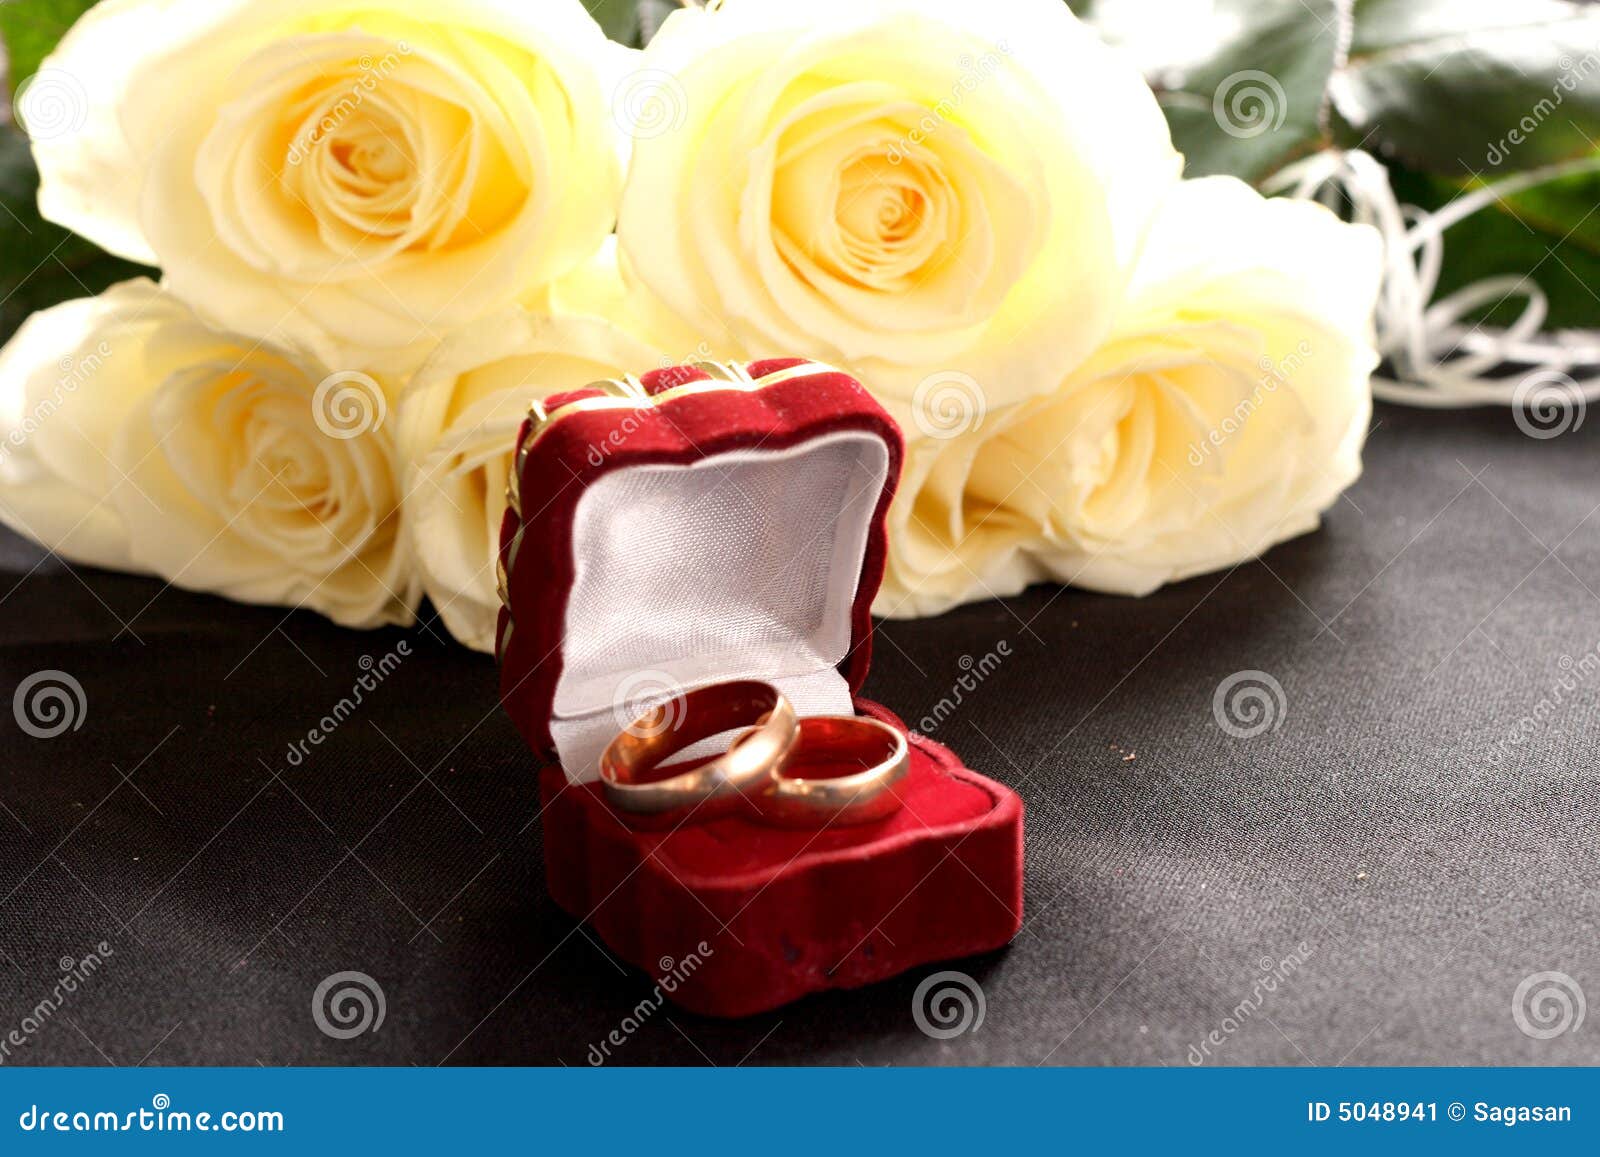 Rings and roses stock image. Image of rings, jewelry, floral - 5048941